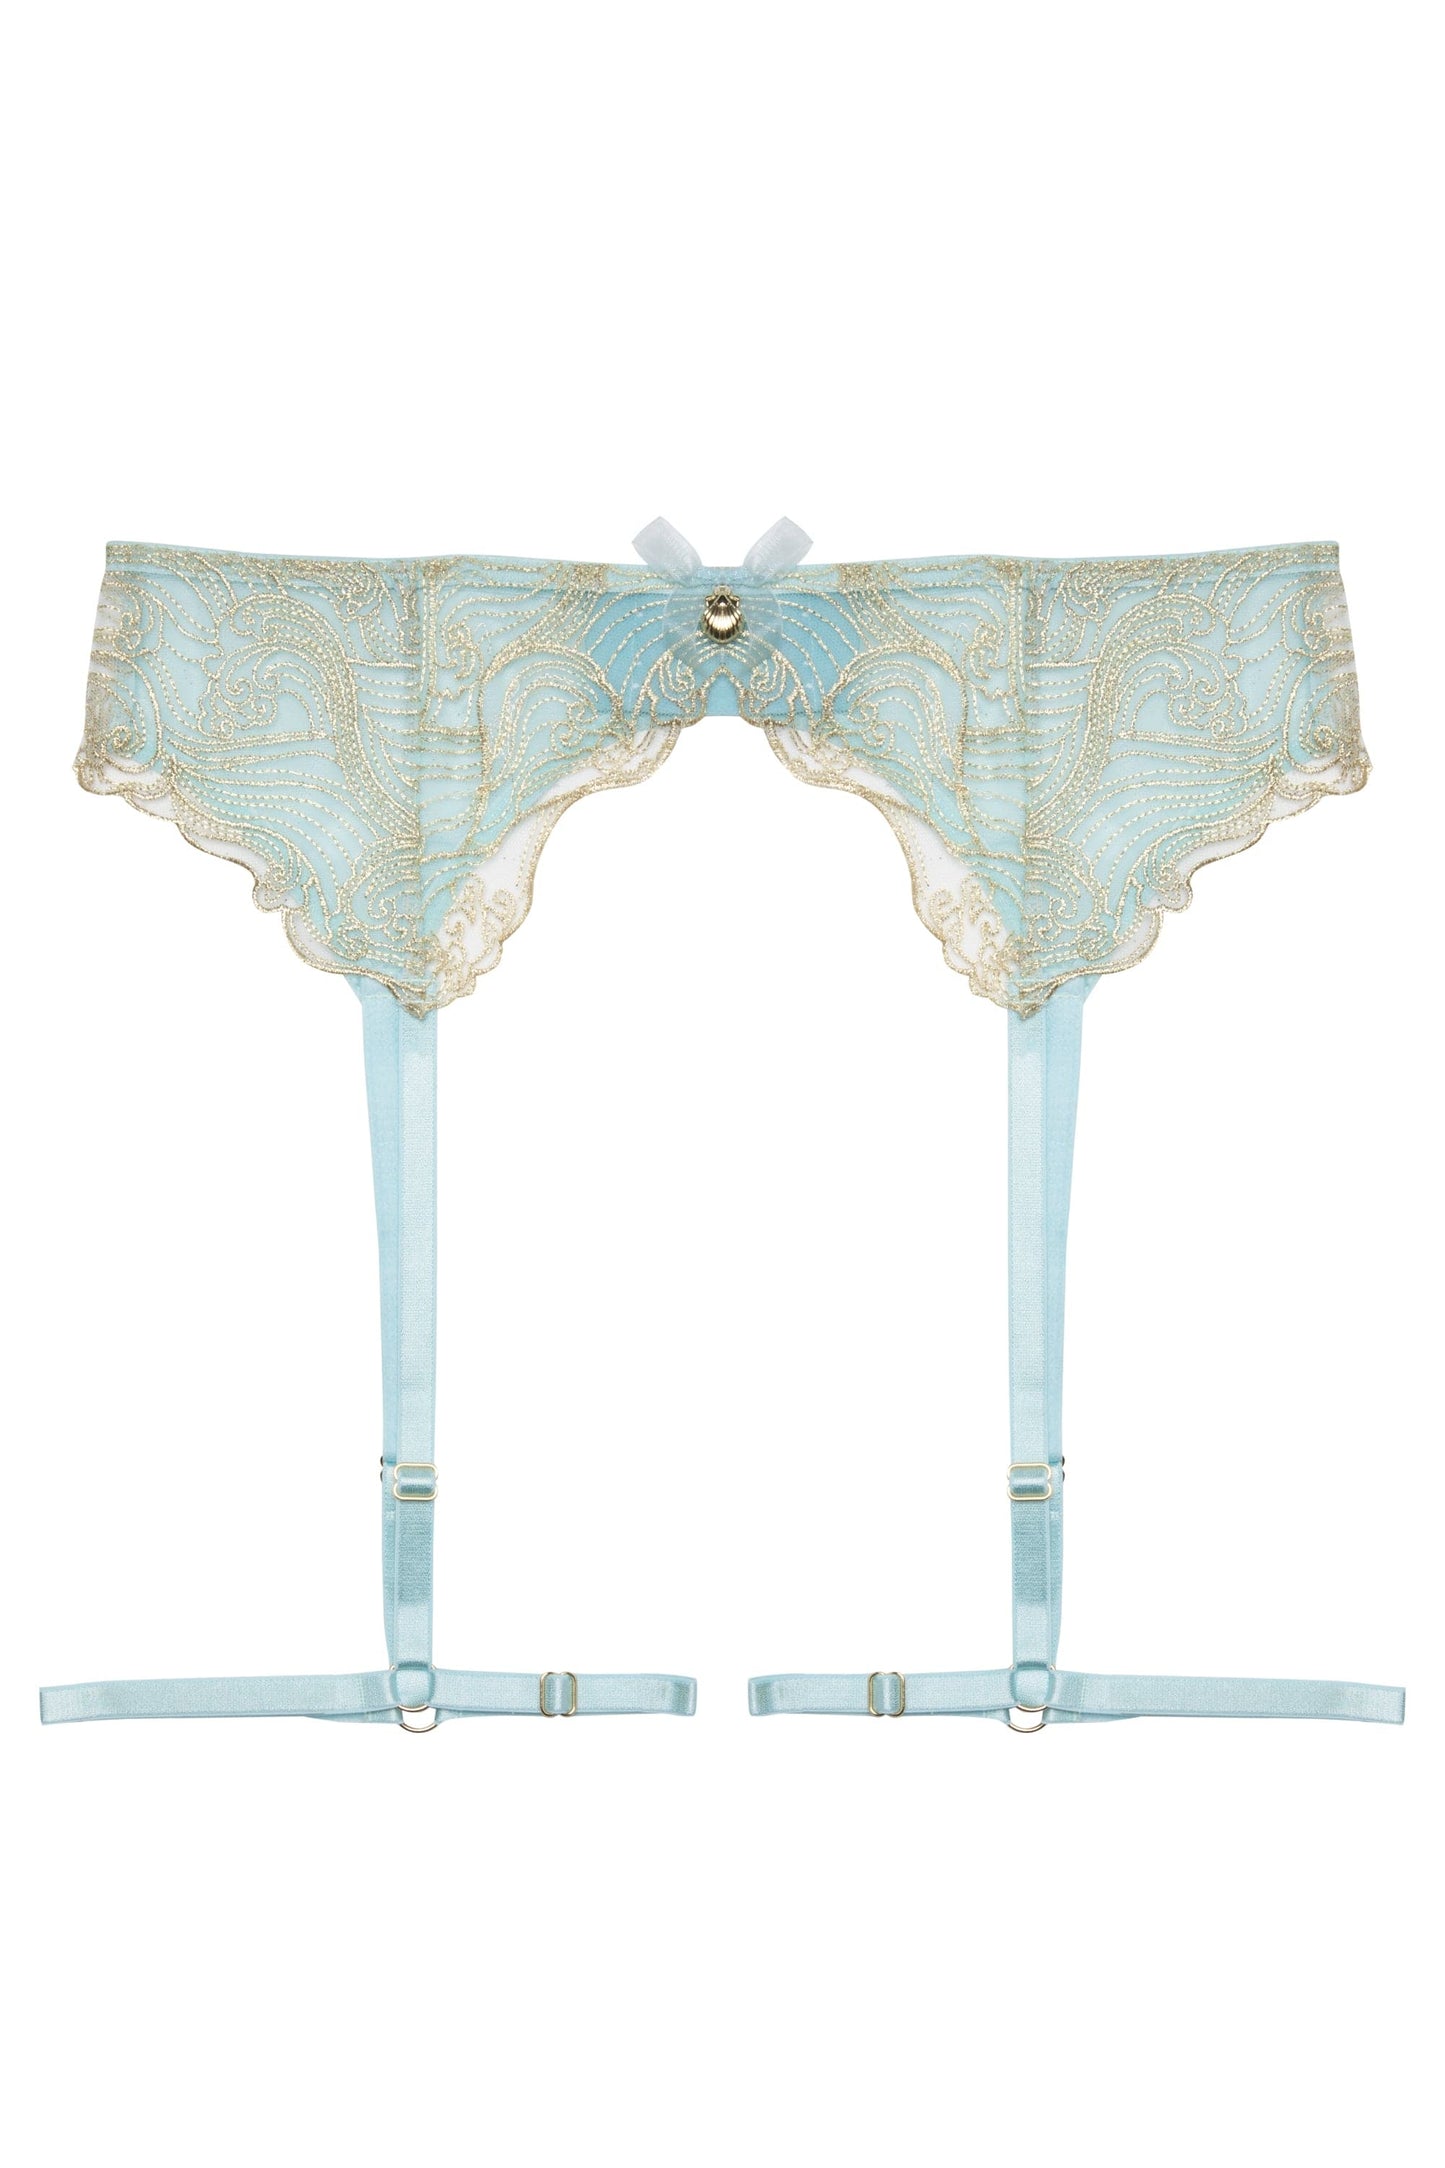 Ayaka Gold On Blue Wave Embroidery Suspender Belt with Leg Harnesses - sizes 4-14